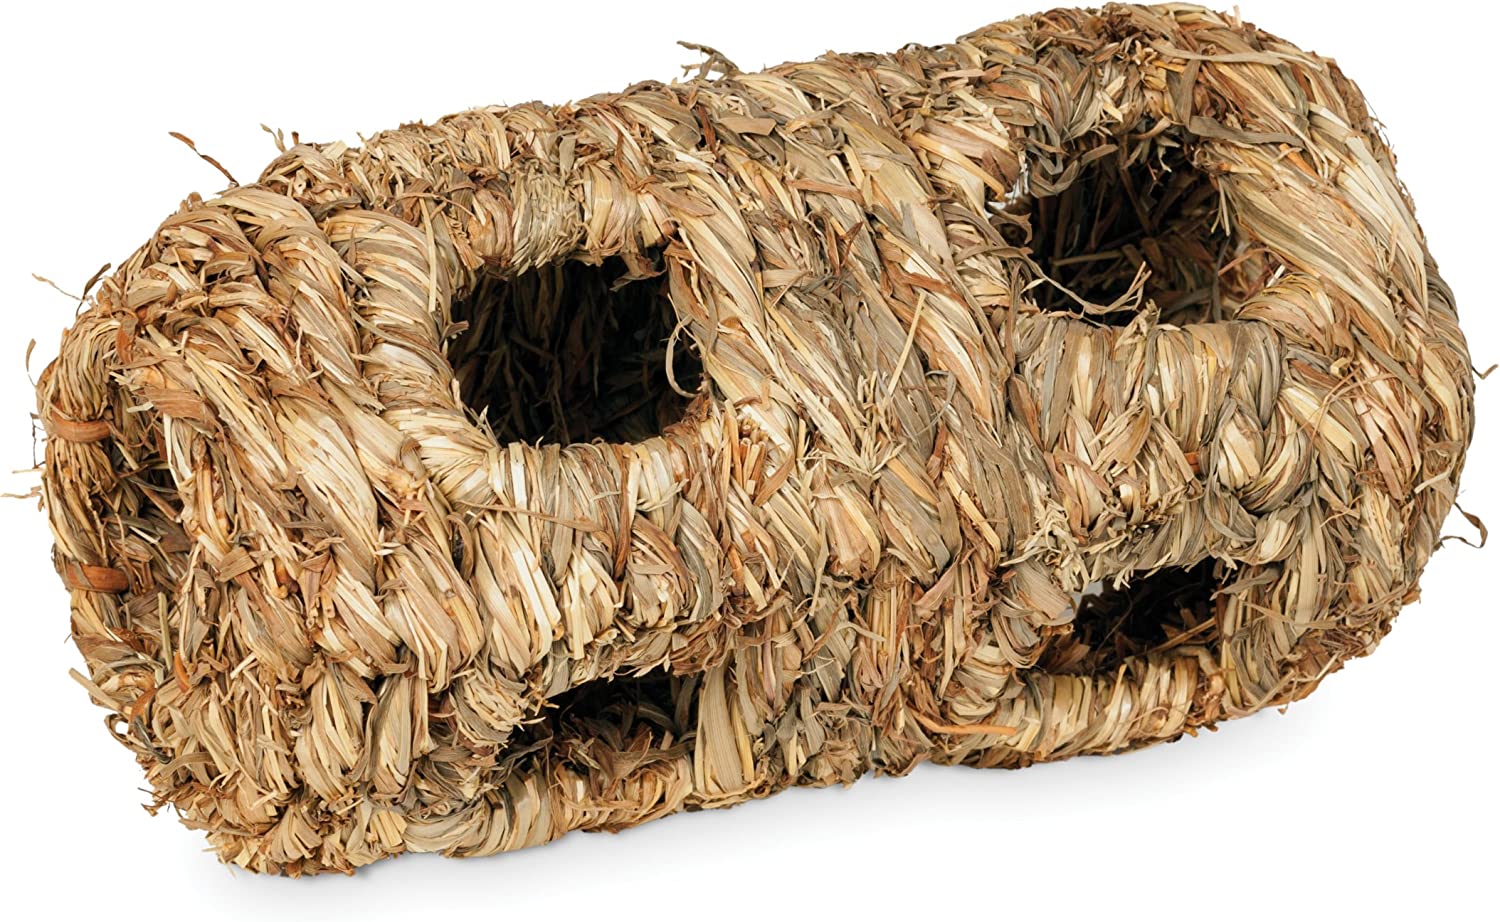 Prevue Hendryx 1092 Nature&#39;s Hideaway Grass Tunnel Toy, Small, Black, 7.5 x 3.75 x 3.75